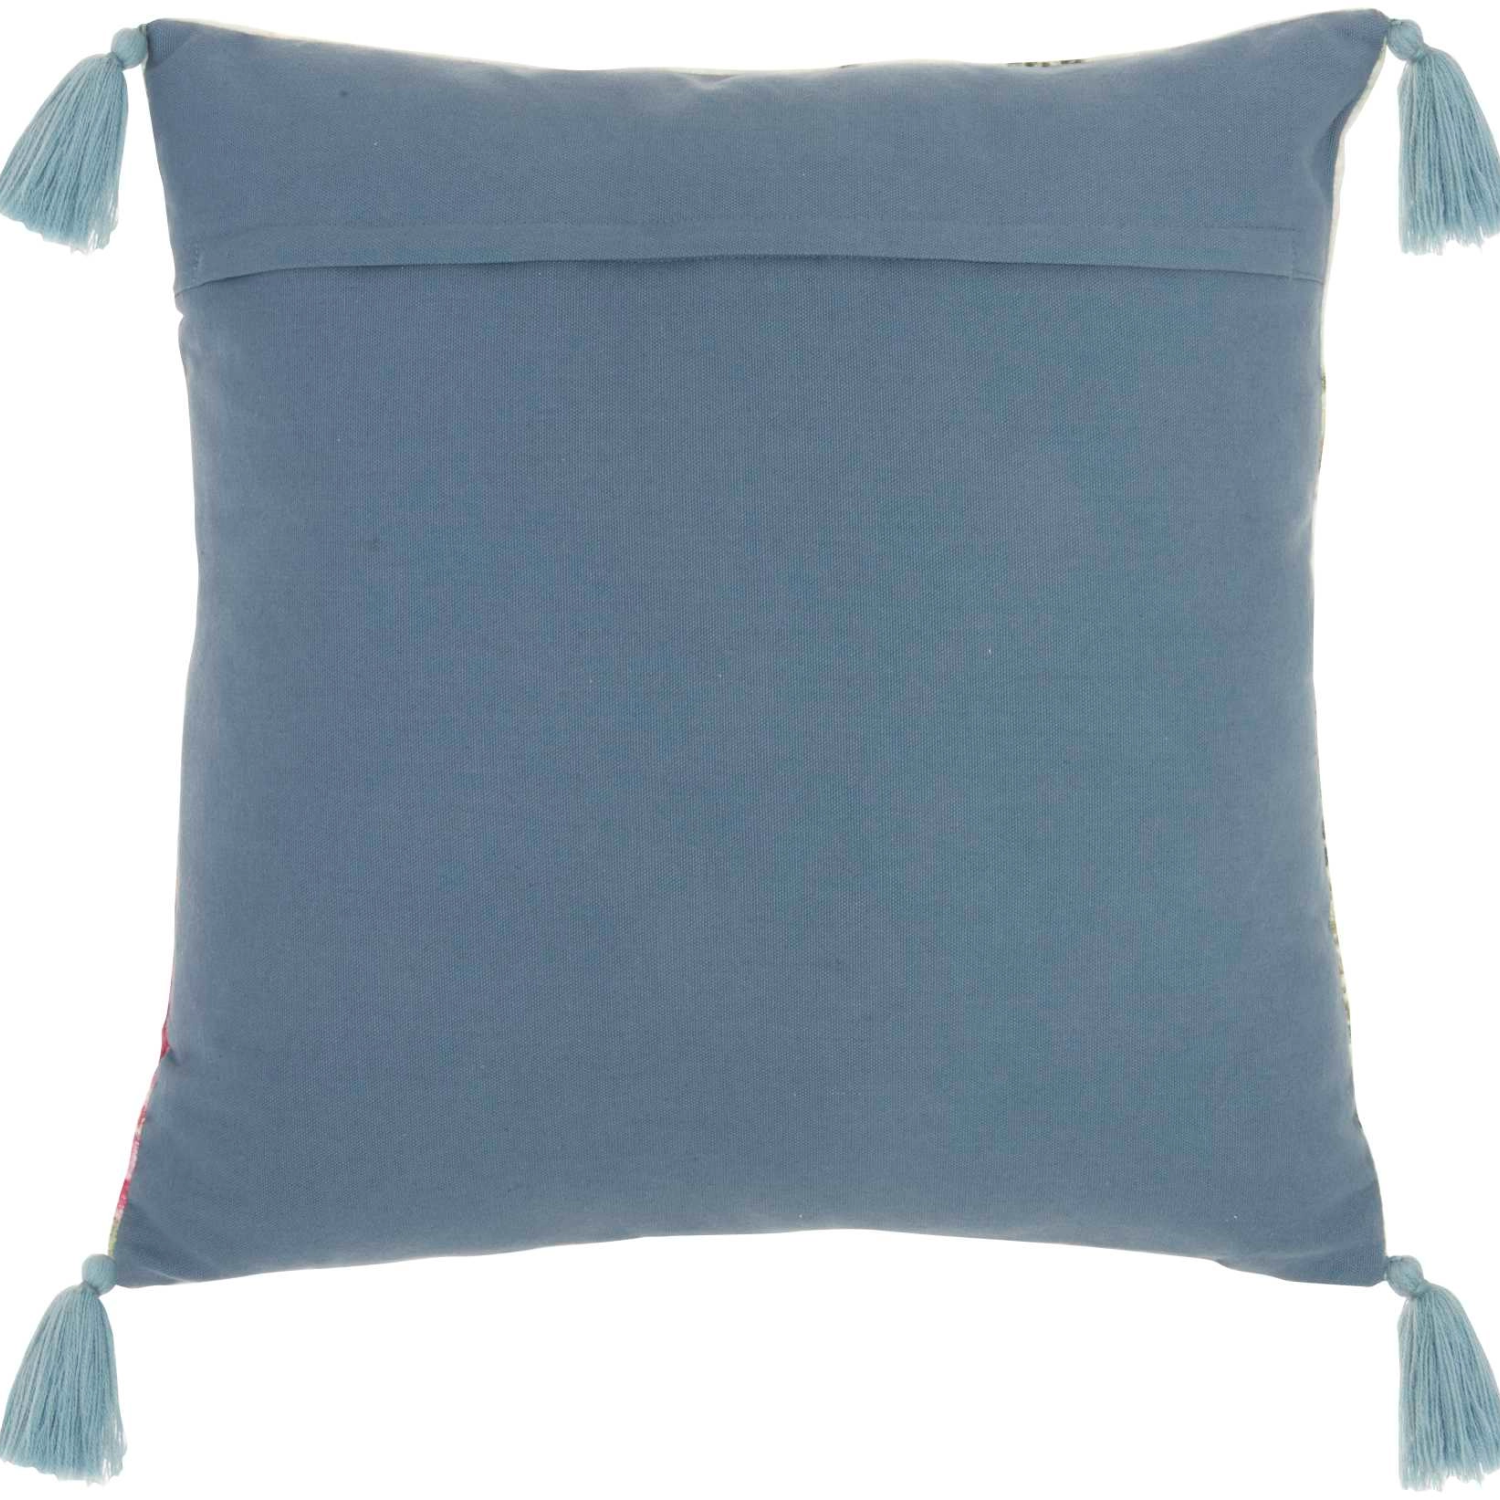 Sofia Accent Pillow Multi Back Side View with Hidden Zipper